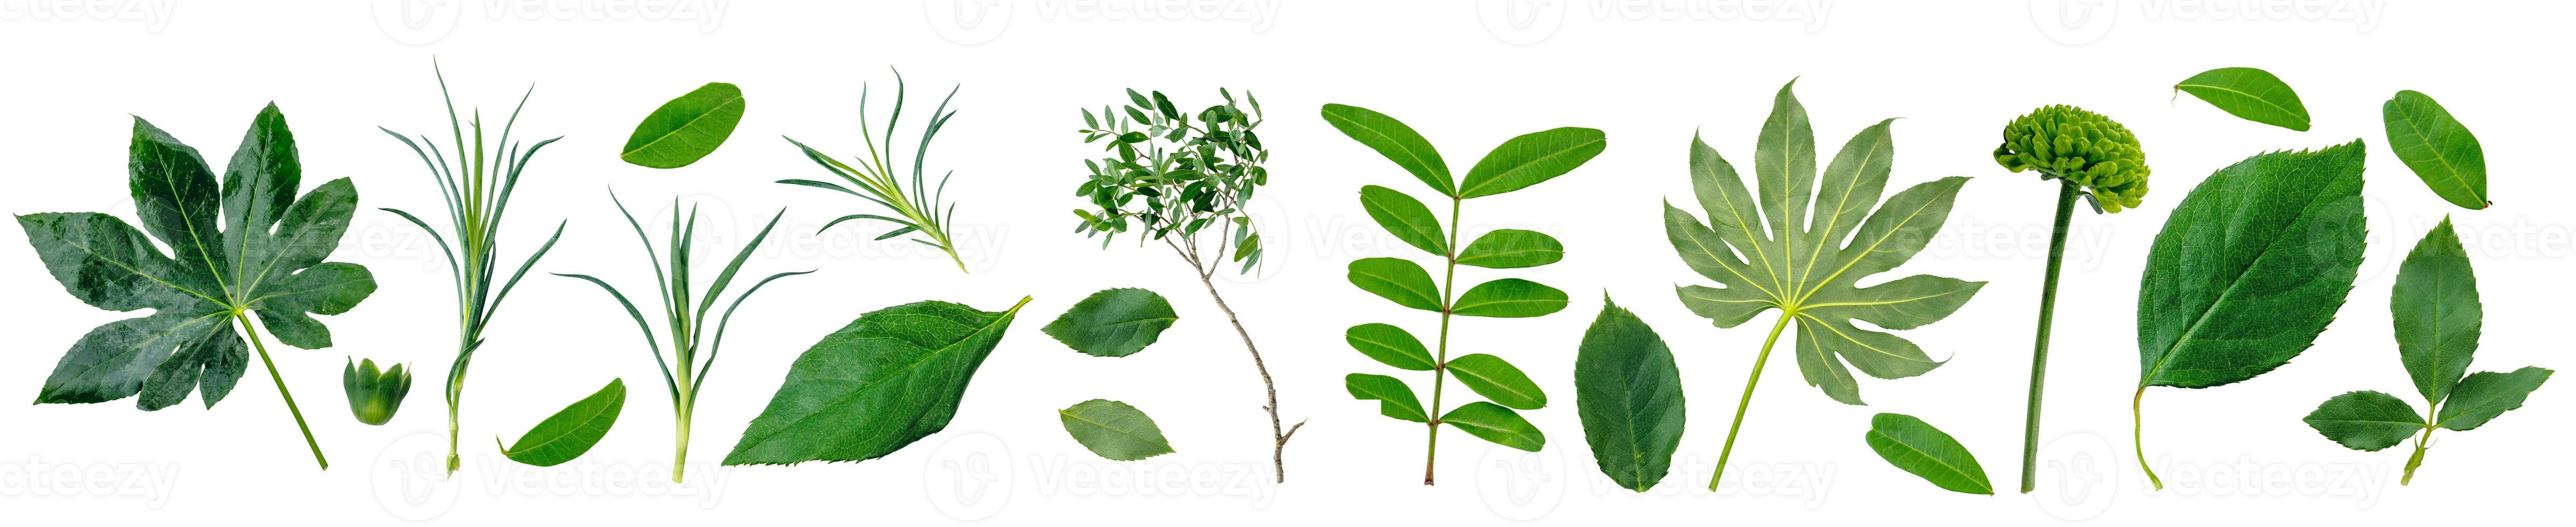 Green leaves plants and foliage elements collection, set isolated on transparent white background photo